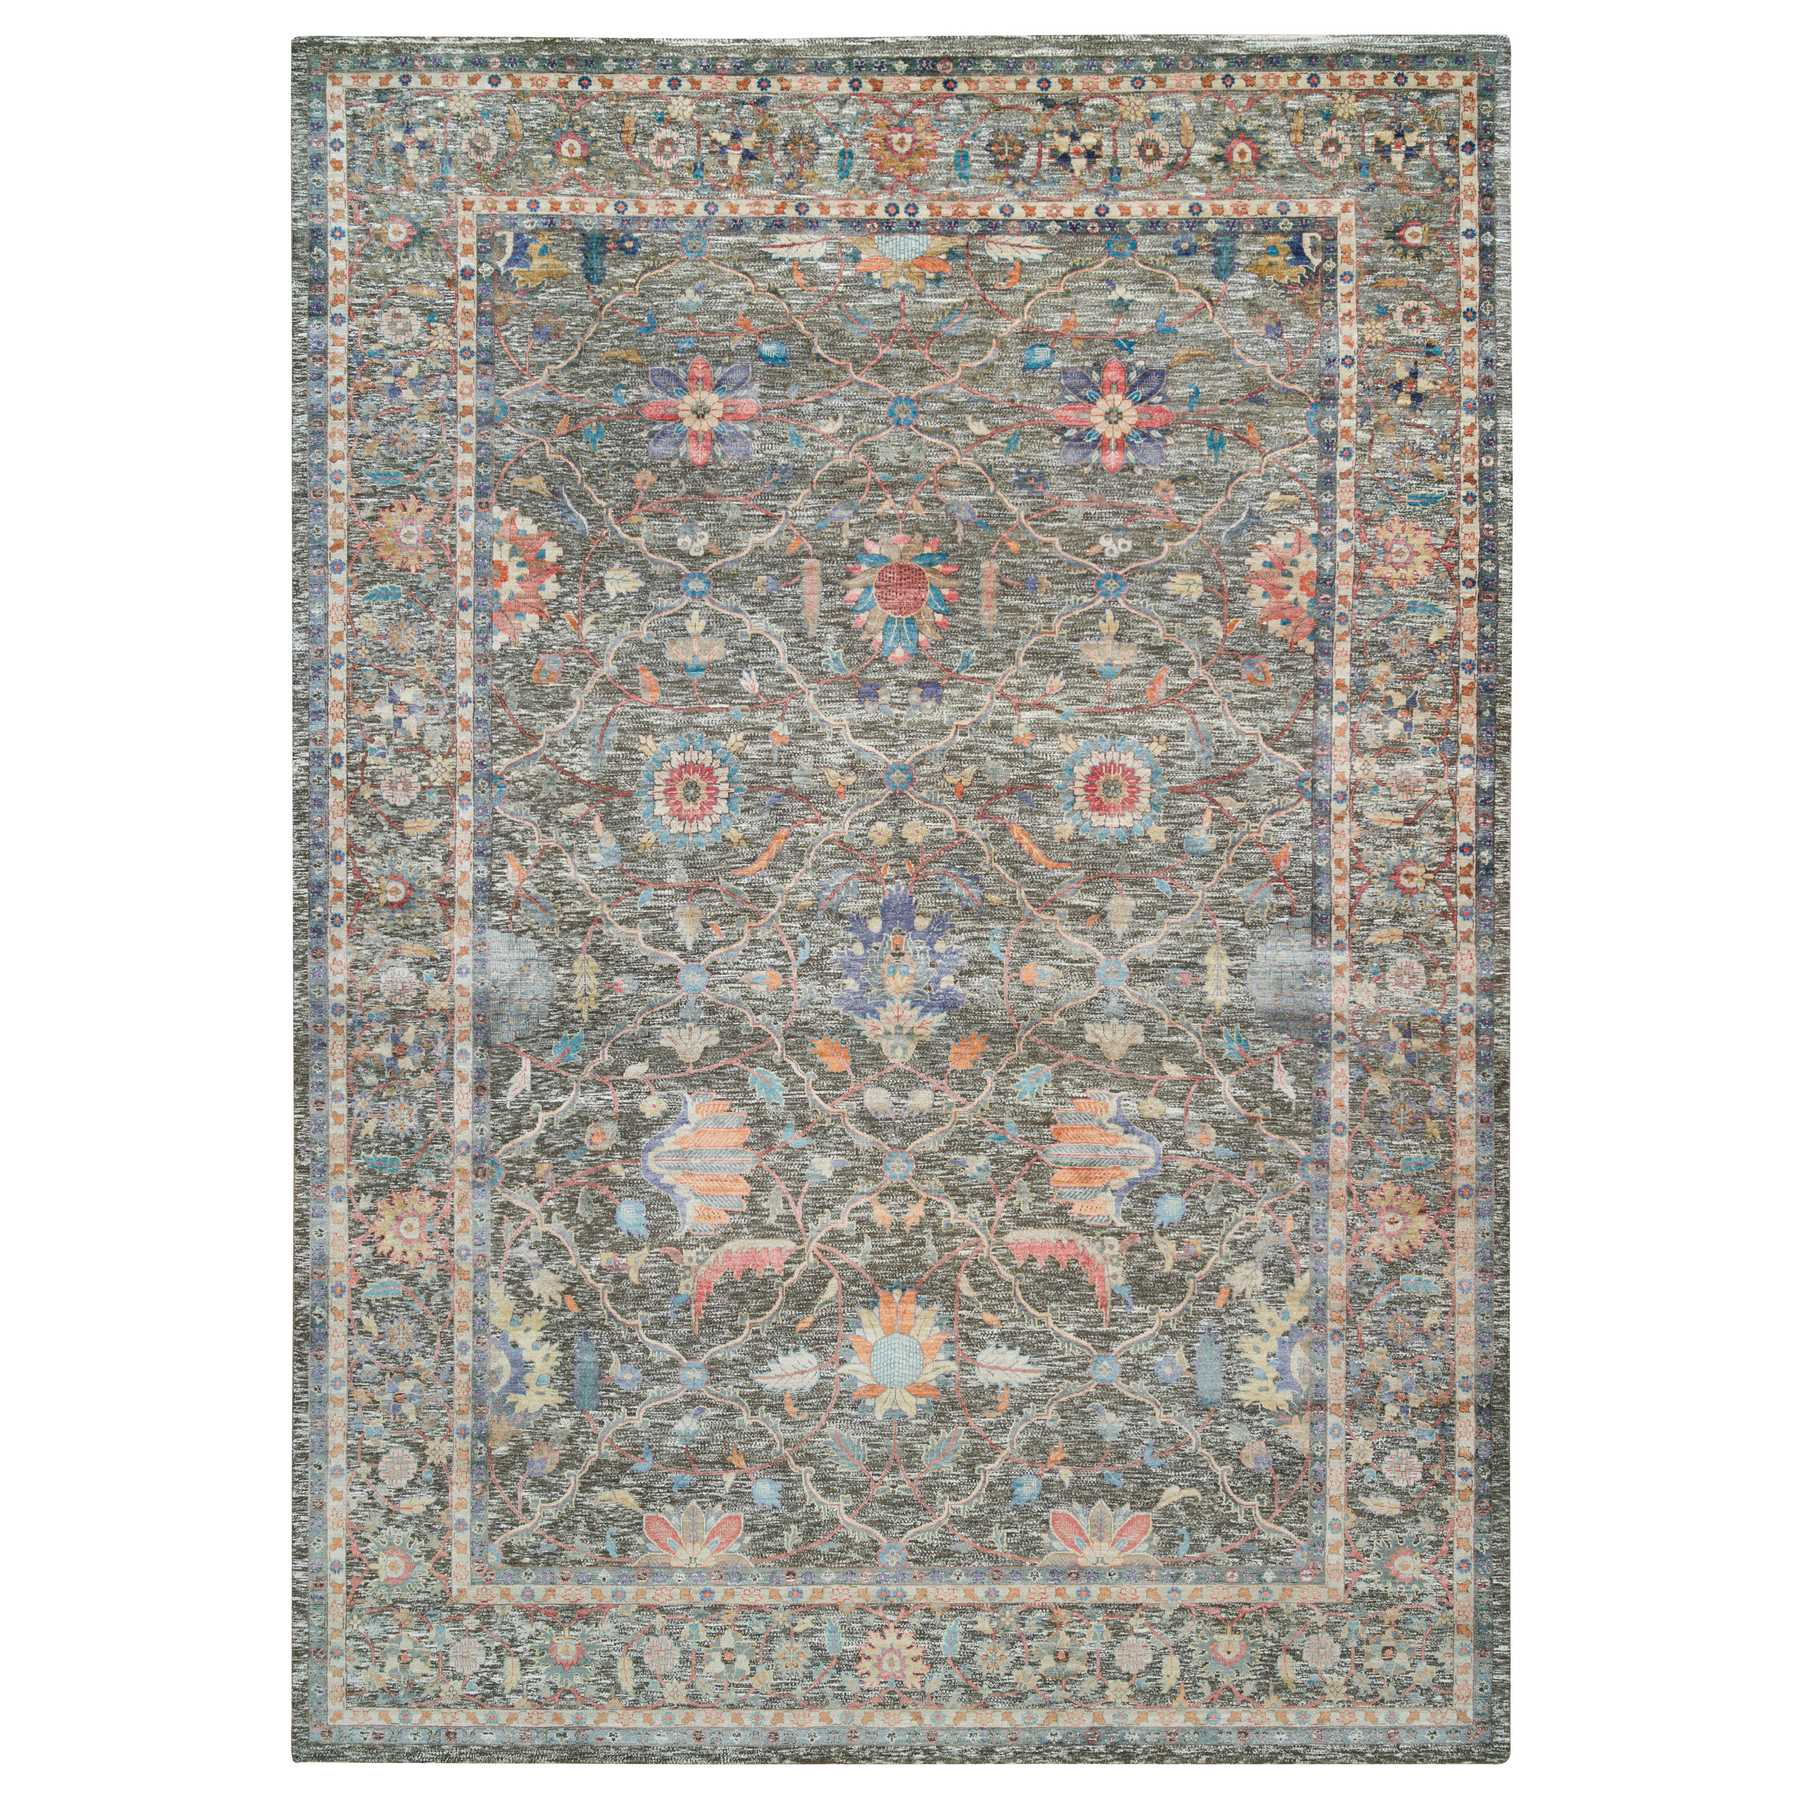  Silk Hand-Knotted Area Rug 9'9